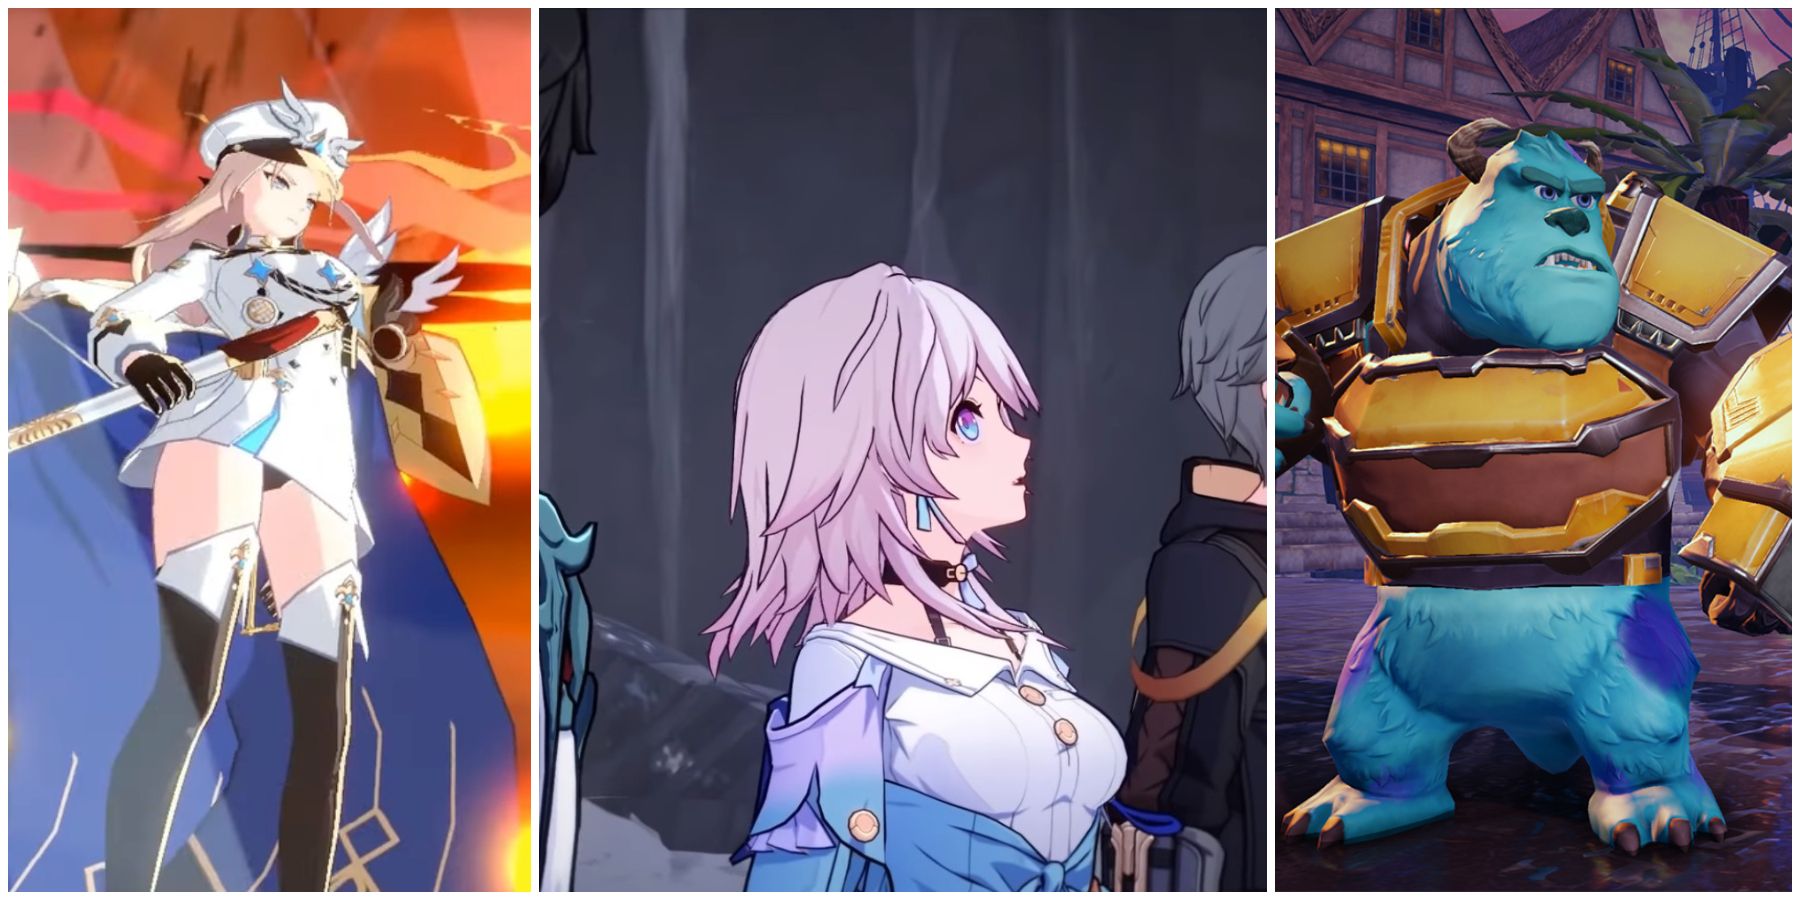 The best RPGs of 2022 – the most exciting upcoming RPG games